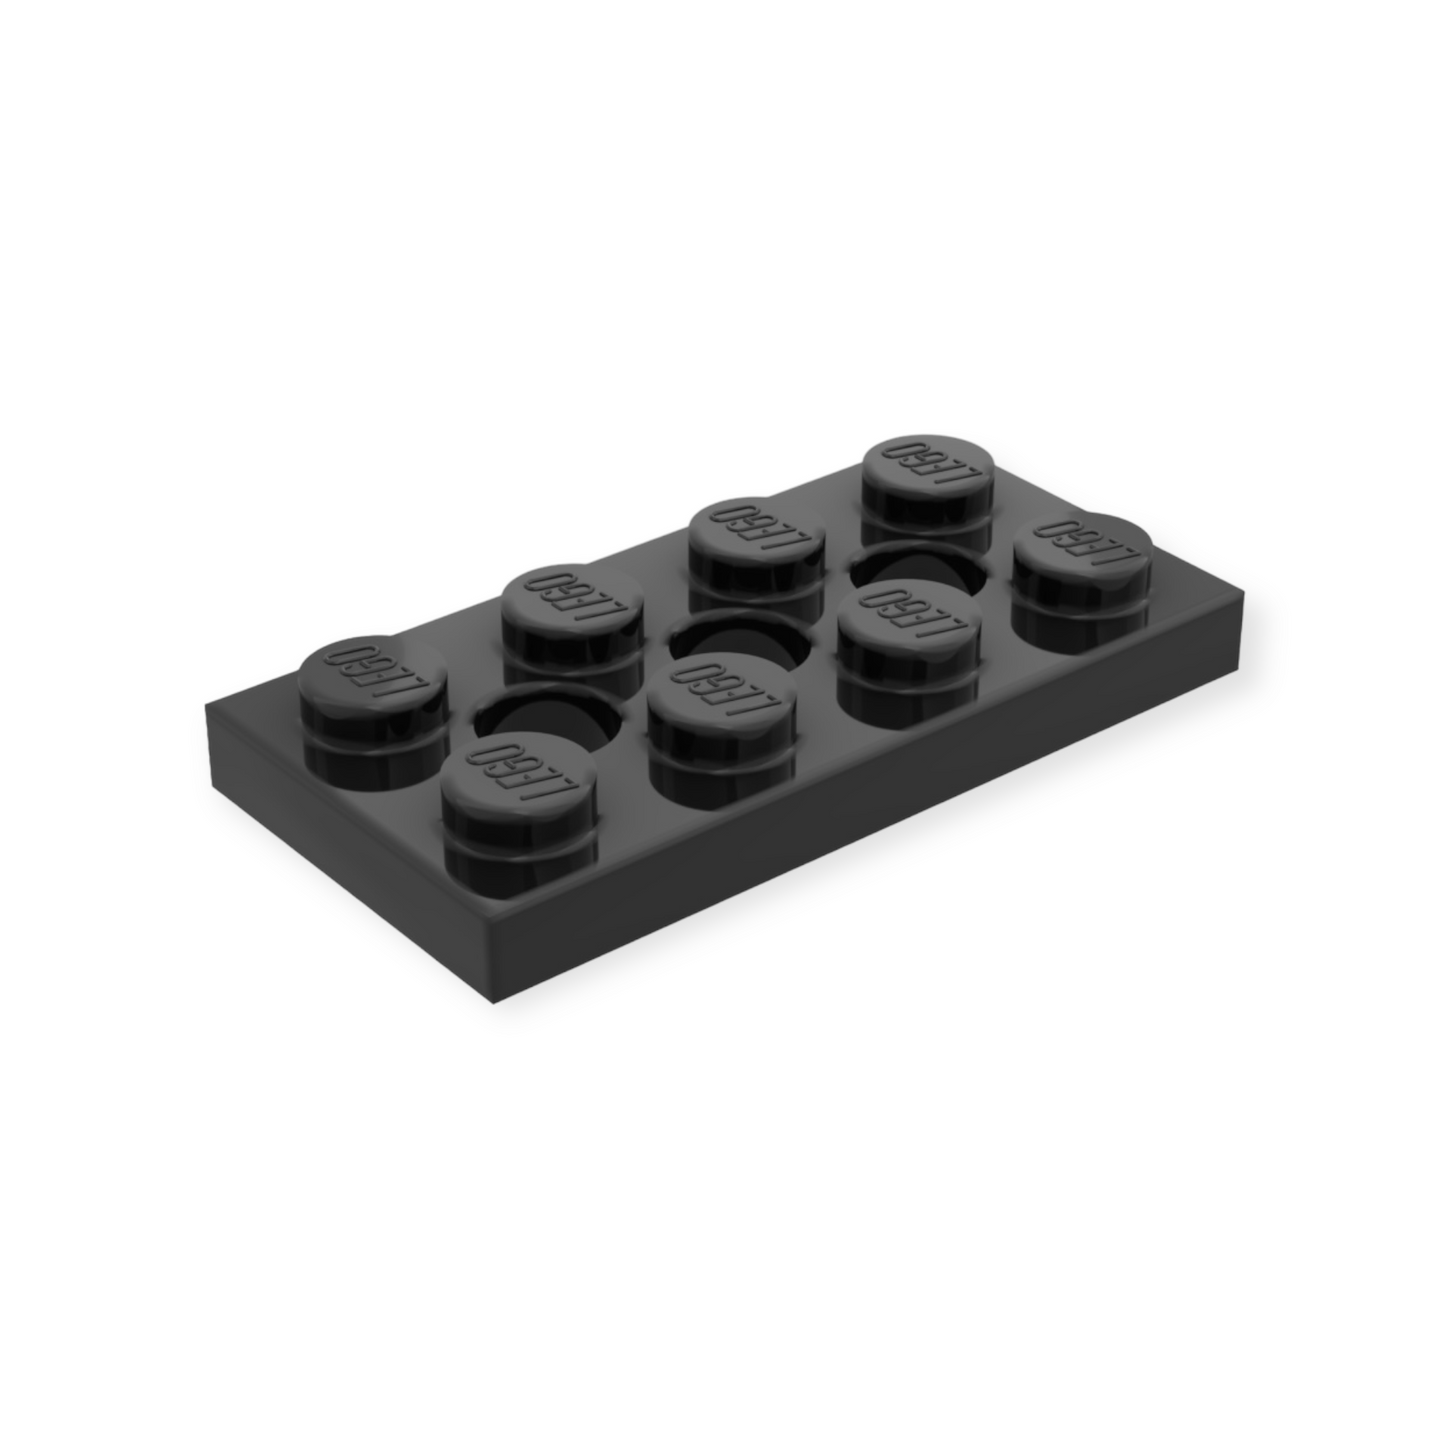 LEGO Technic Plate 2x4 with 3 Holes - in Black